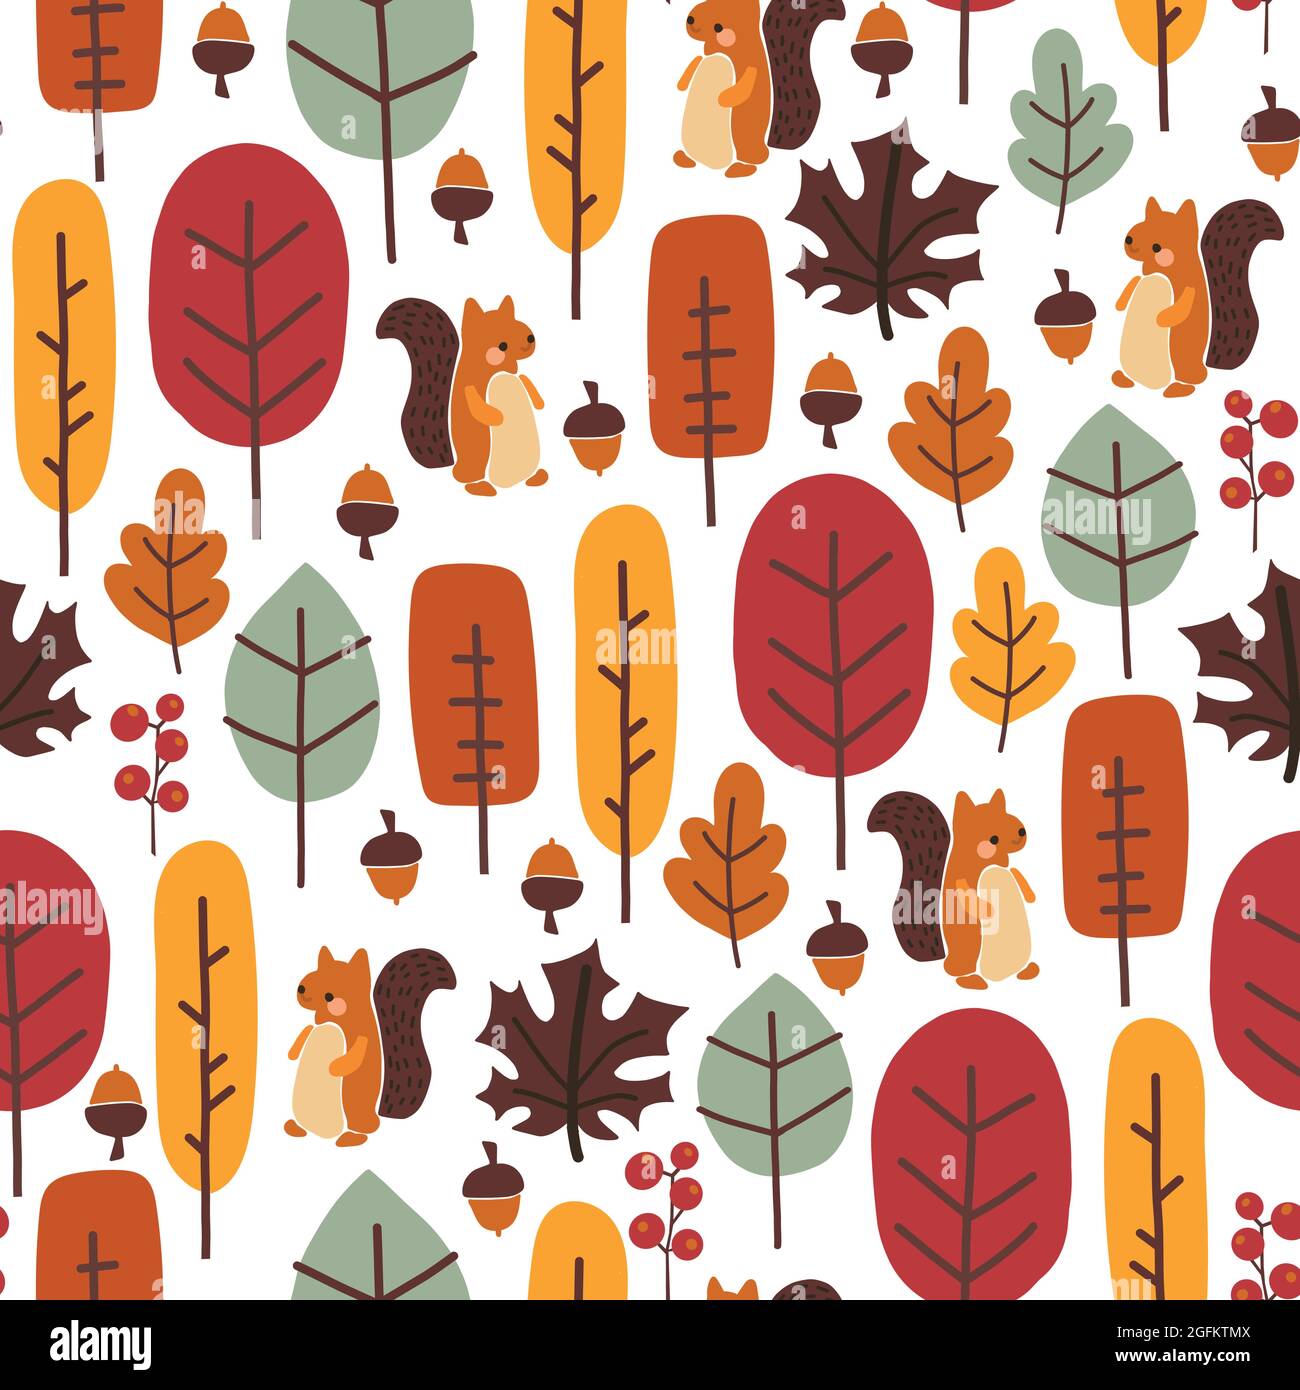 Seamless pattern with cute squirrel, autumn leaves, trees, nuts ...